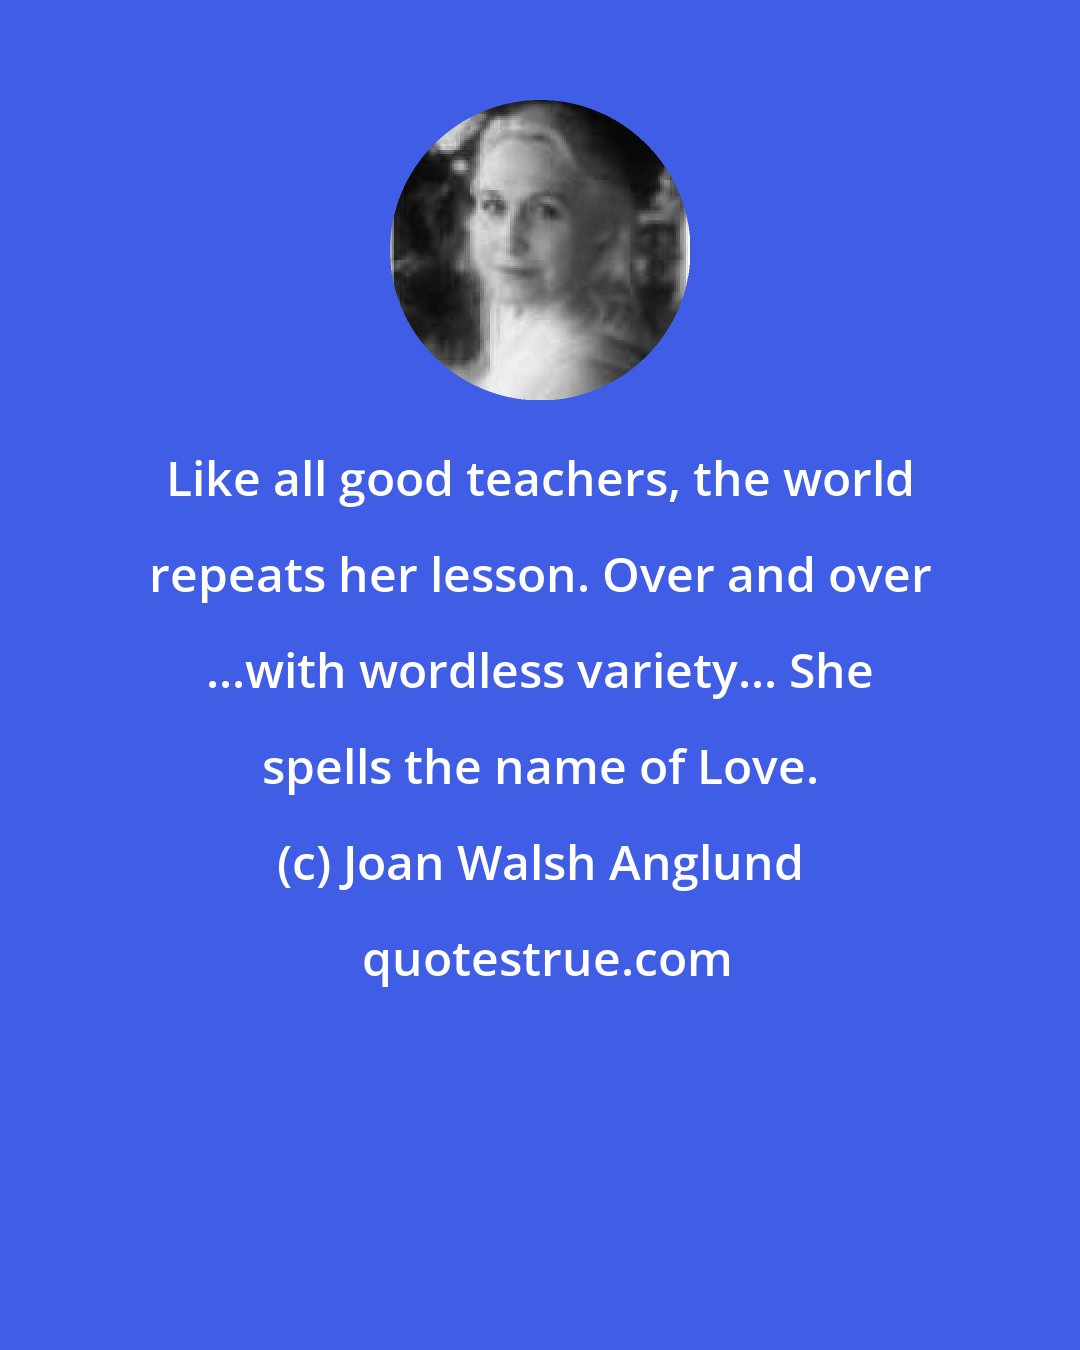 Joan Walsh Anglund: Like all good teachers, the world repeats her lesson. Over and over ...with wordless variety... She spells the name of Love.